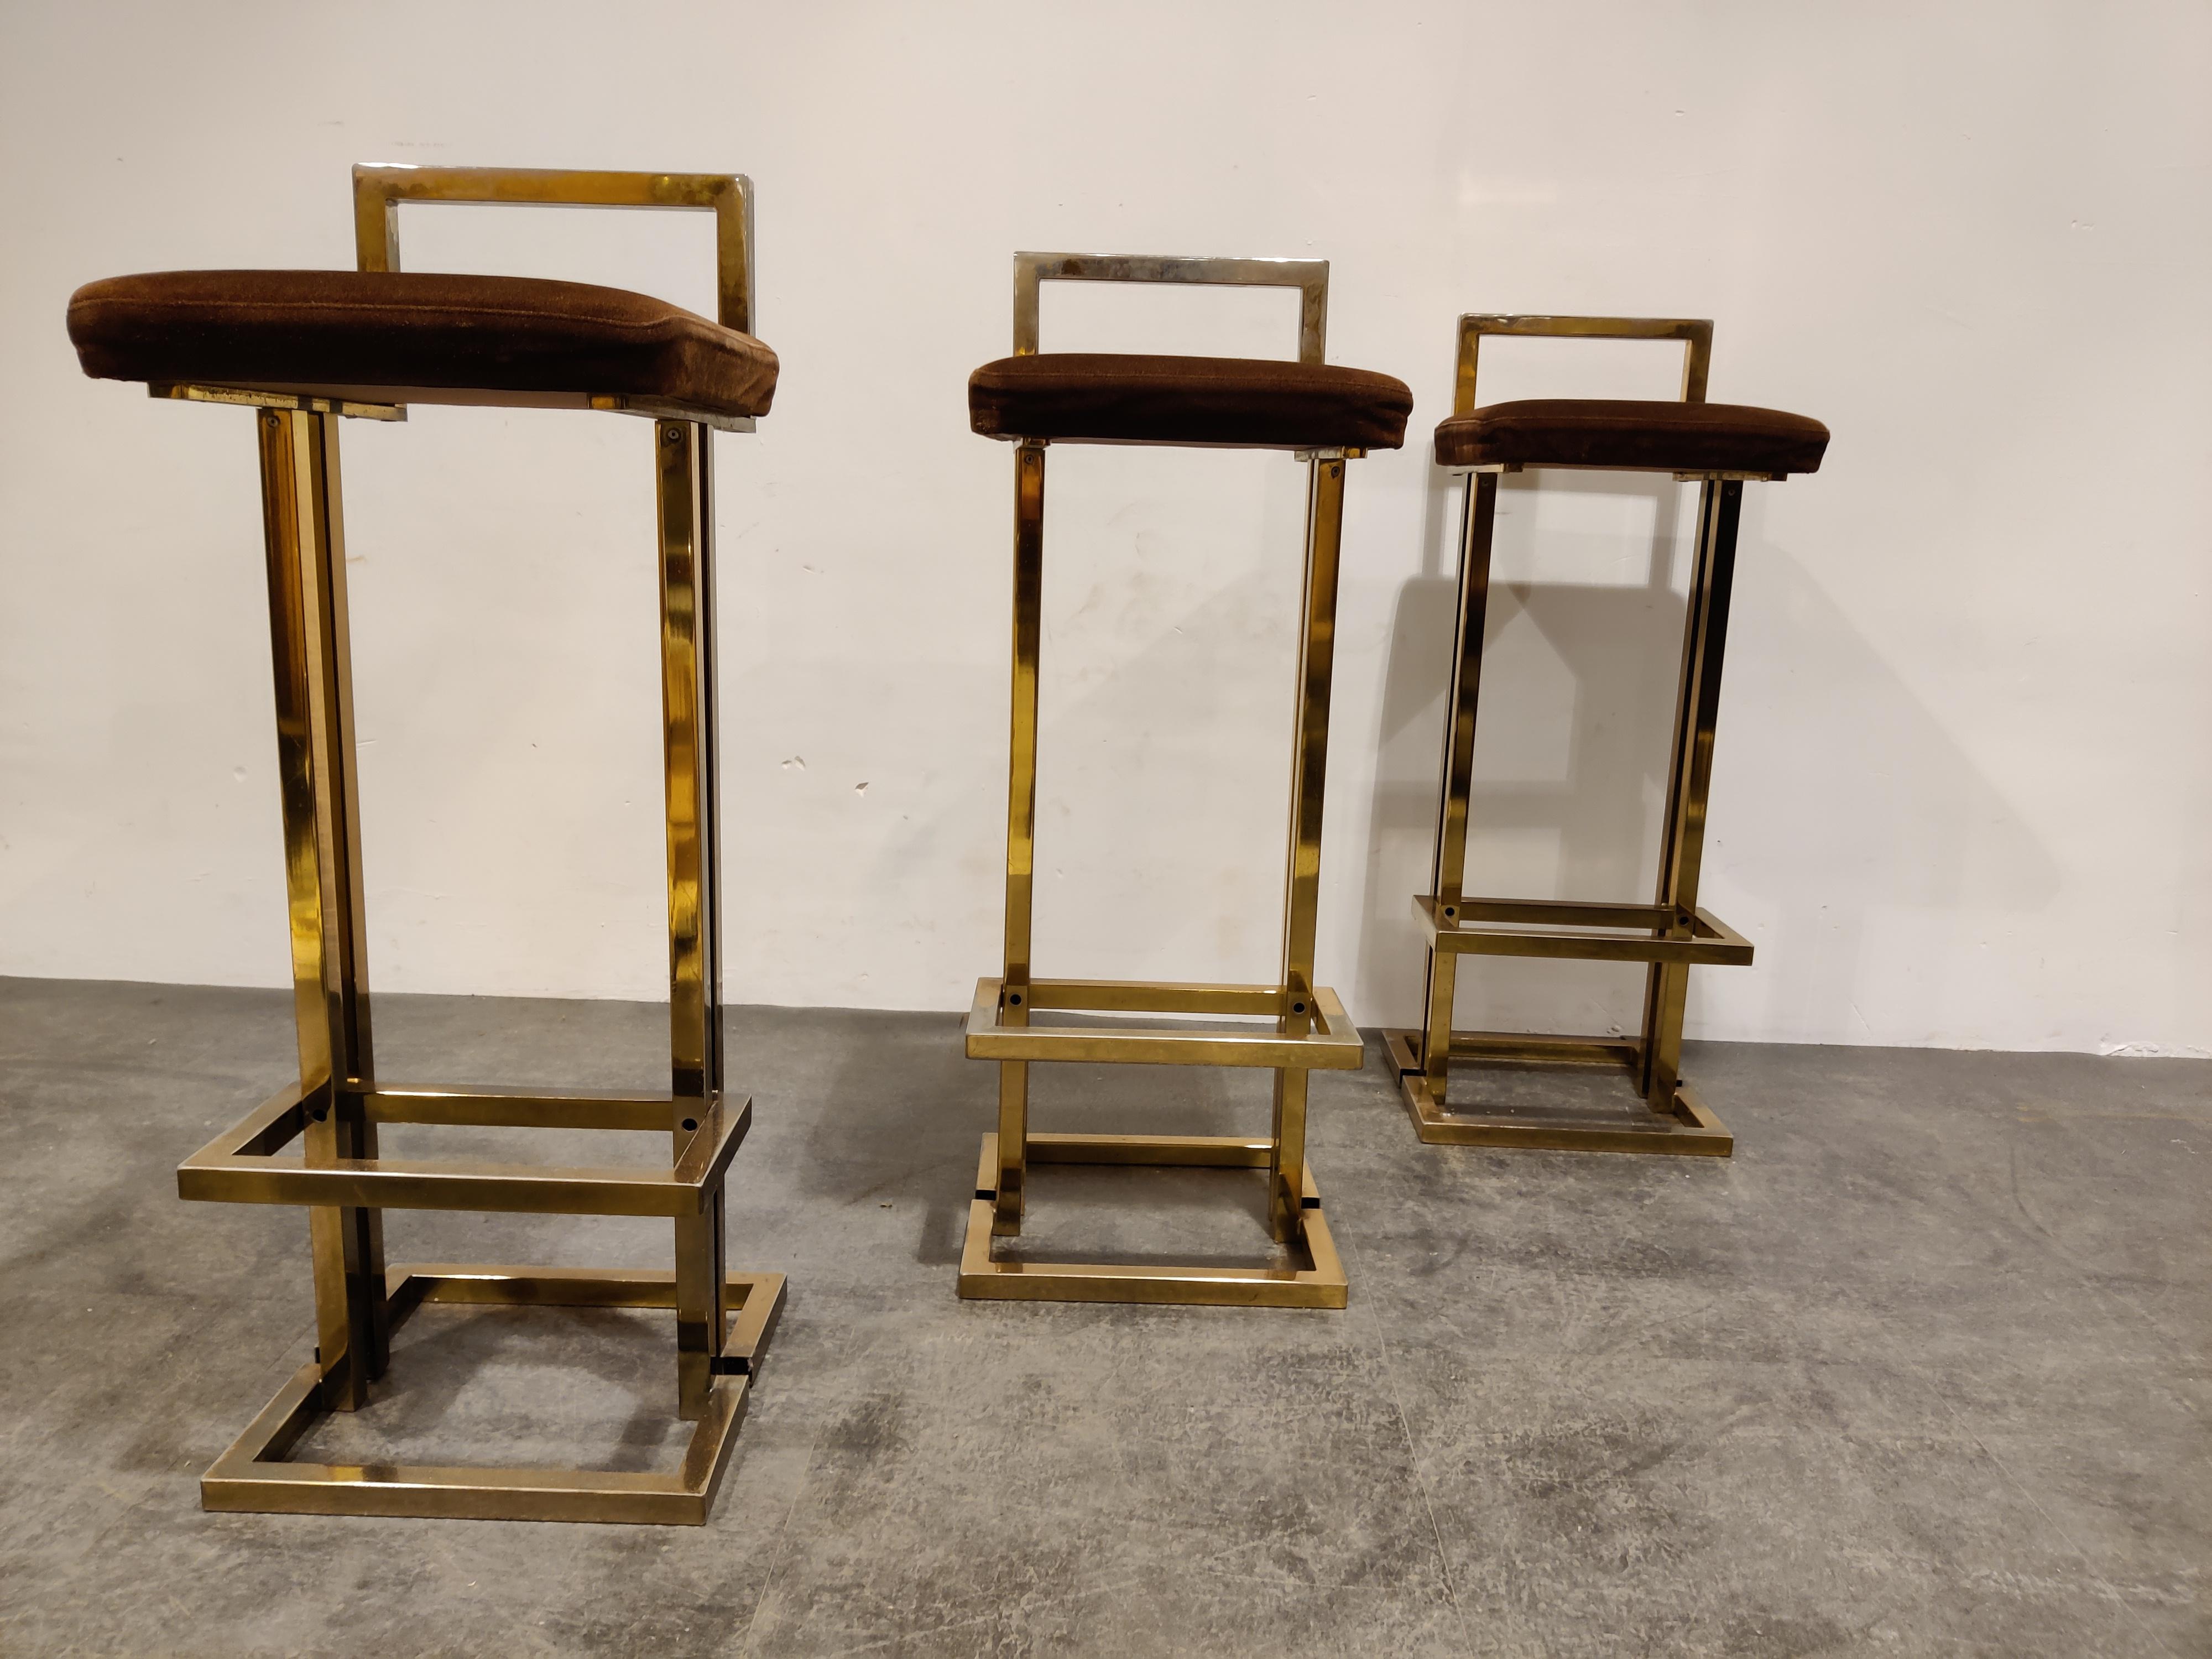 Beautiful original brass and suede bar stools by Belgochrom.

Beautiful timeless design with a luxury appeal.

They have their original brown suede upholstery which mixes well with the brass frame.

Good overall condition. Upholstery is very